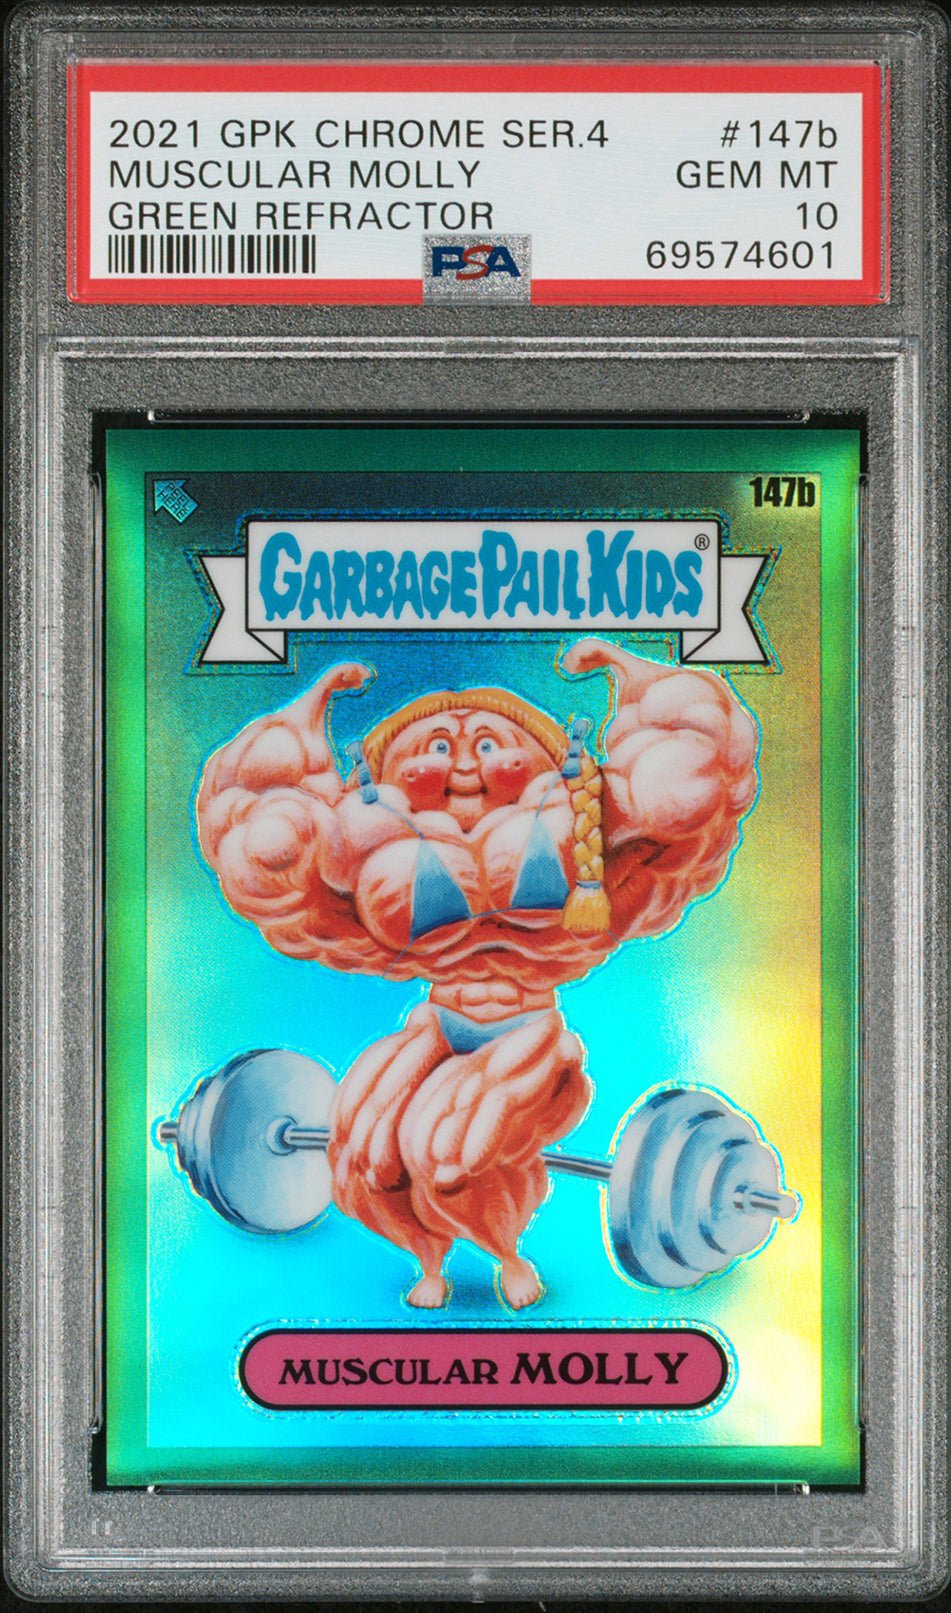 MUSCULAR MOLLY PSA 10 2021 Topps Chrome Green Refractor 147b 249/299 Garbage Pail Kids Graded Cards Parallel Serial Numbered - Hobby Gems